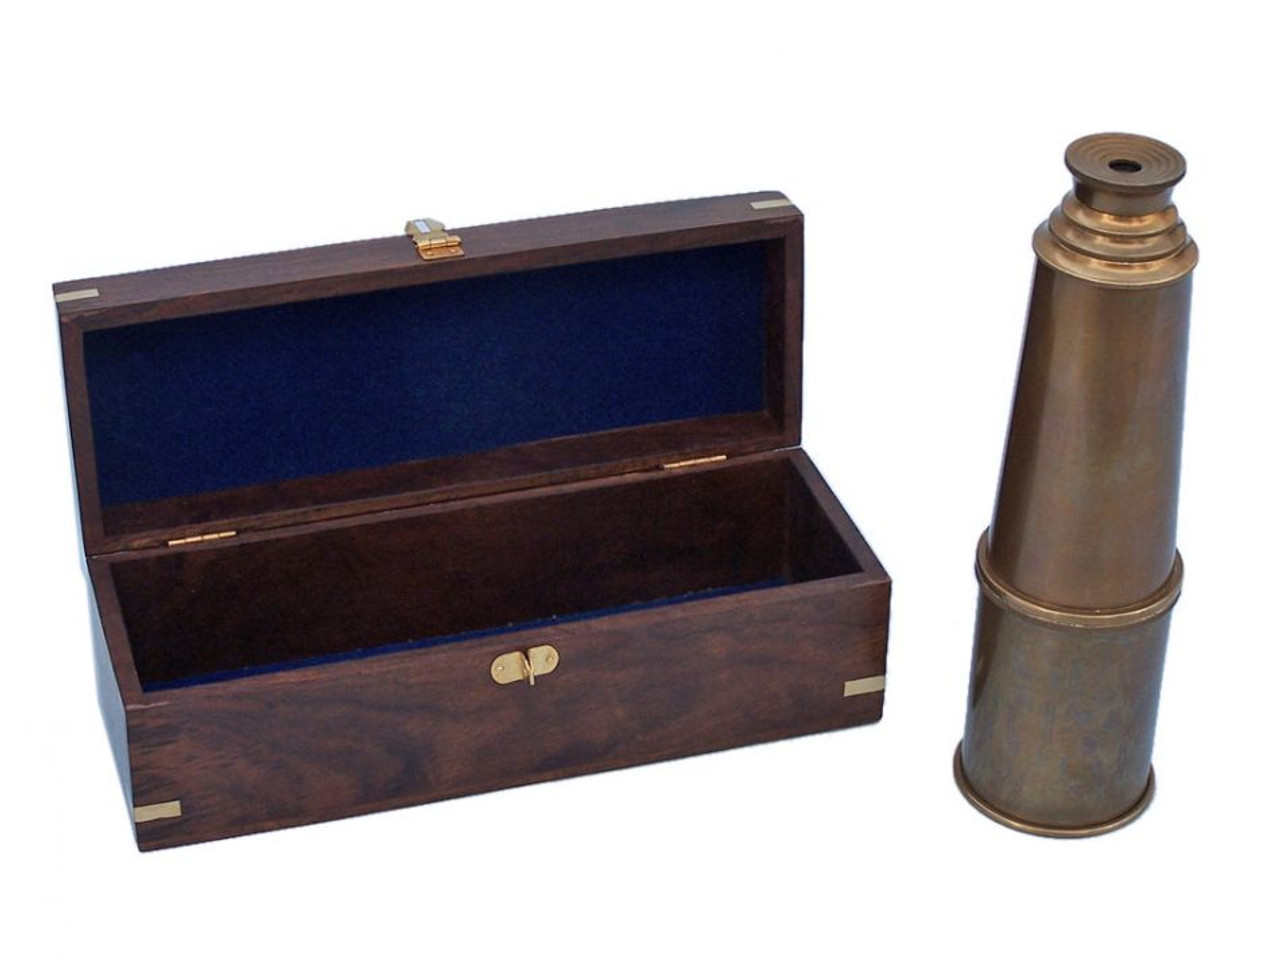  Deluxe Class  Antique Brass Admiral's Spyglass Telescope 27" with Rosewood Box